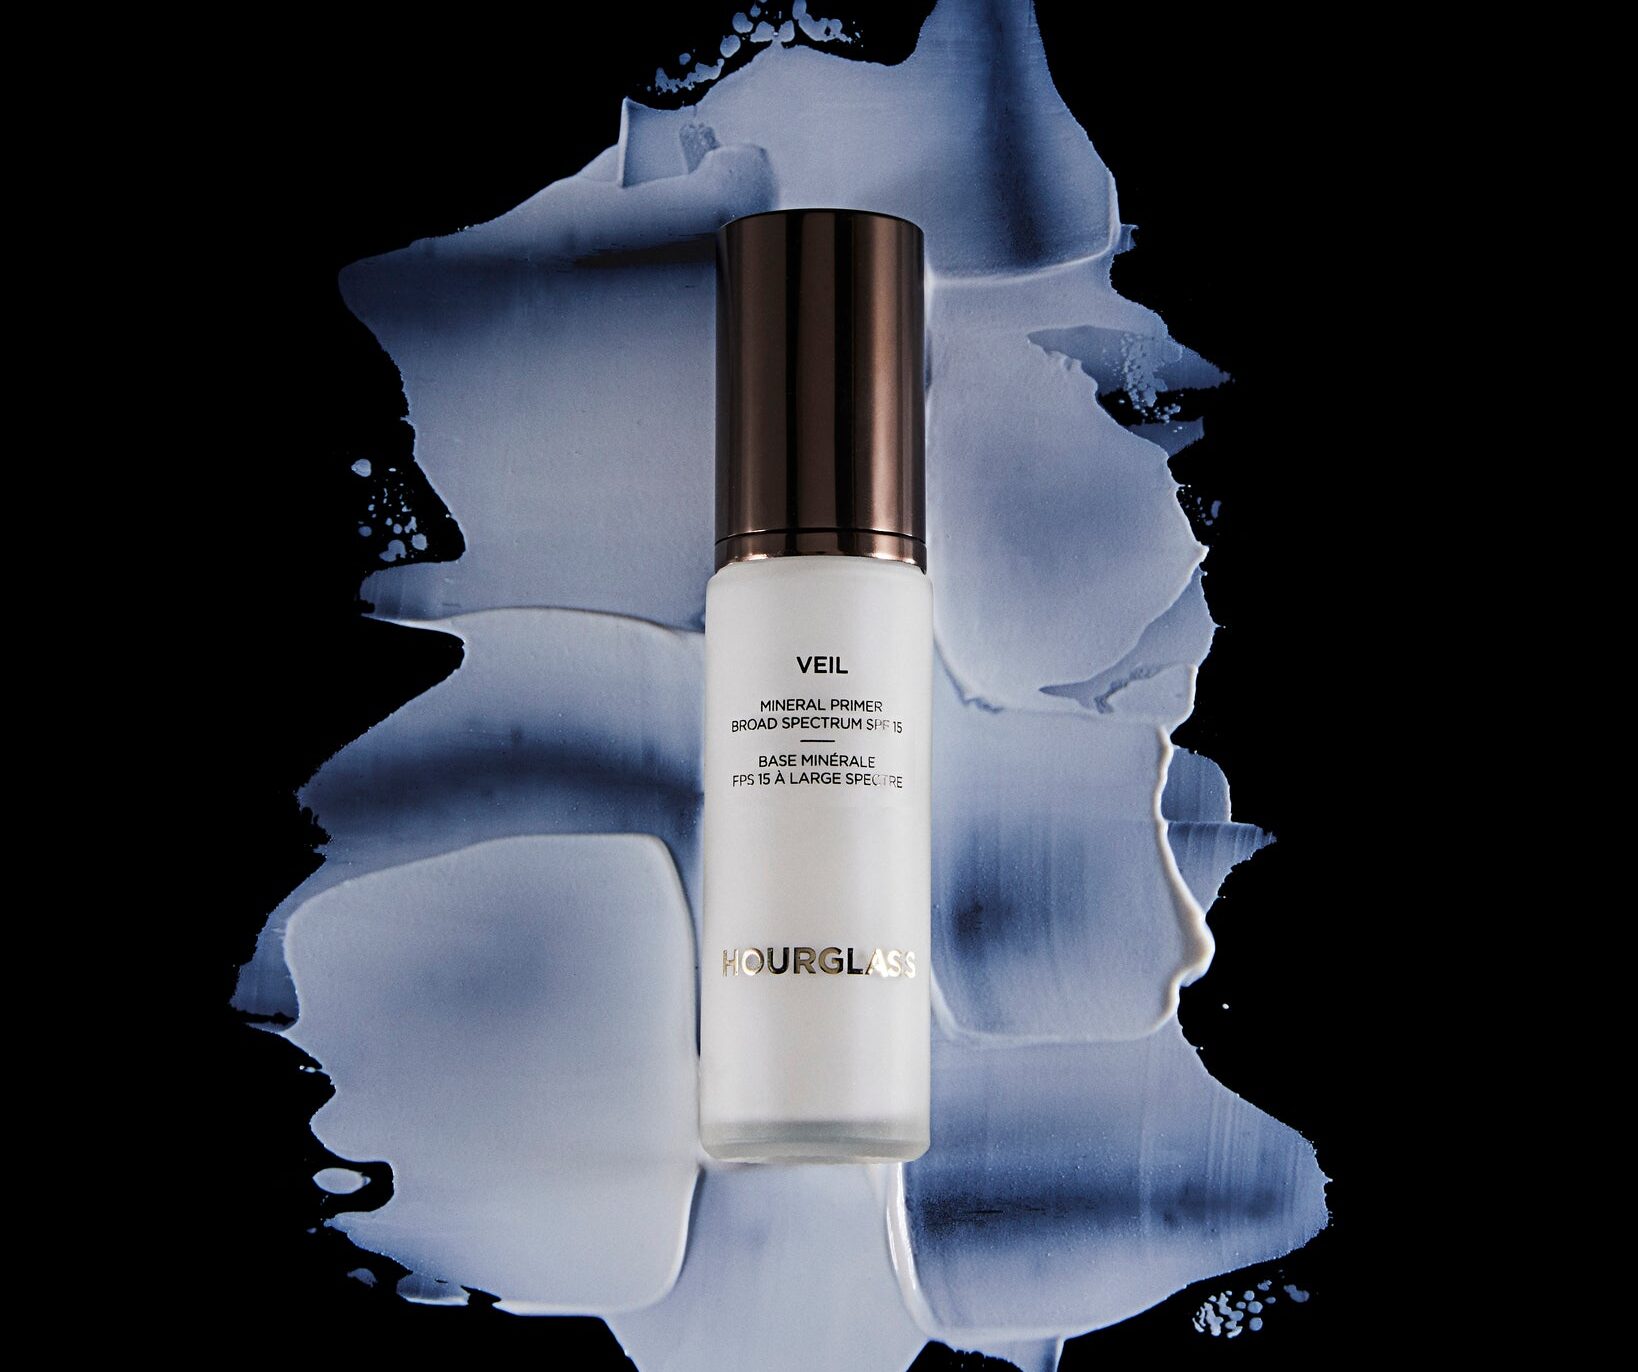 Get Flawless Skin with Hourglass Veil Mineral Primer – Your Beauty Must-Have!